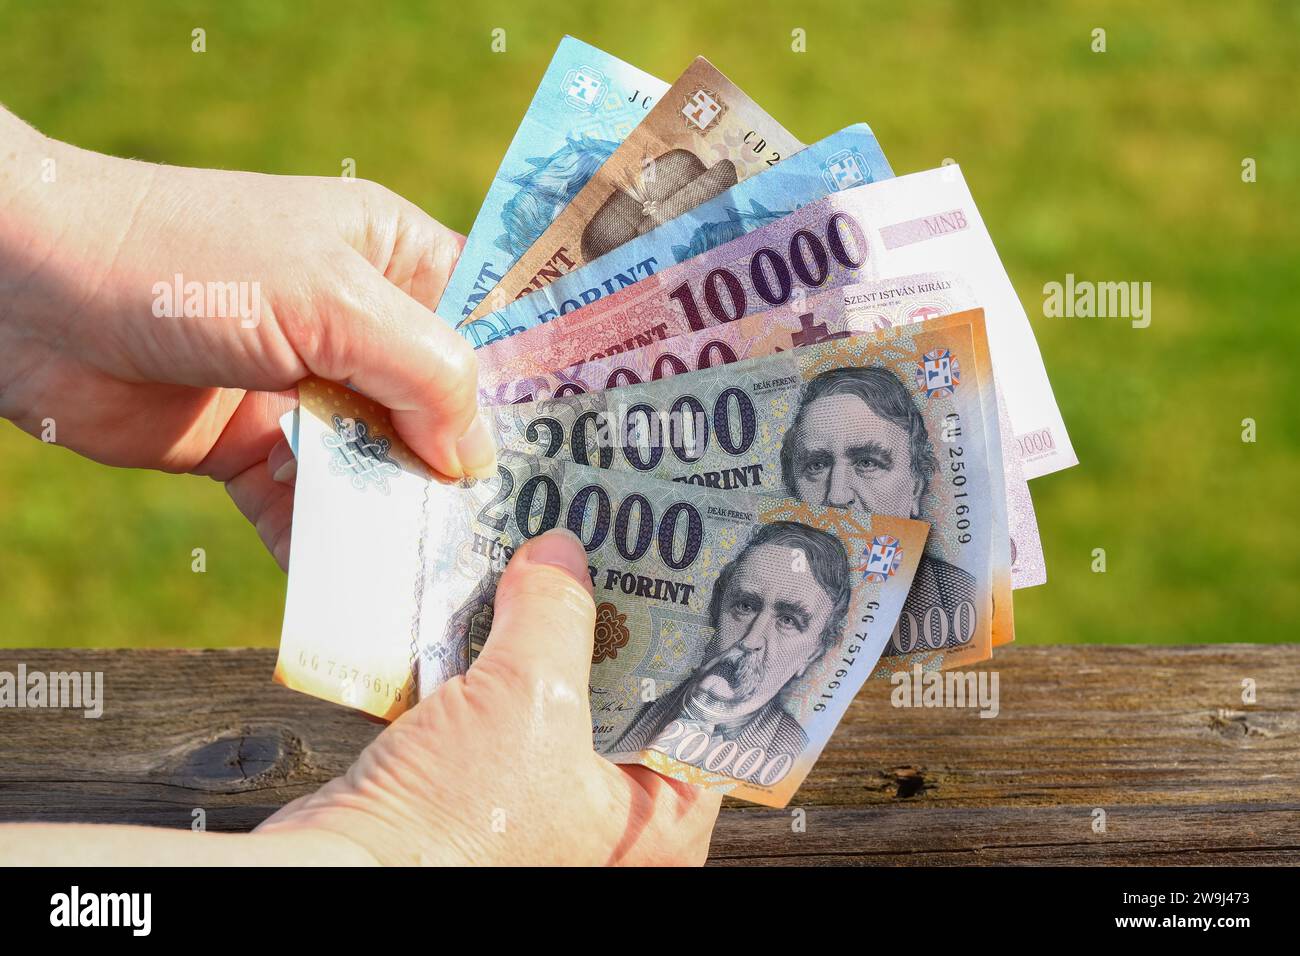 Hungary money, Woman holds a handful of Hungarian Forints in her hand, various banknotes, Financial concept Stock Photo